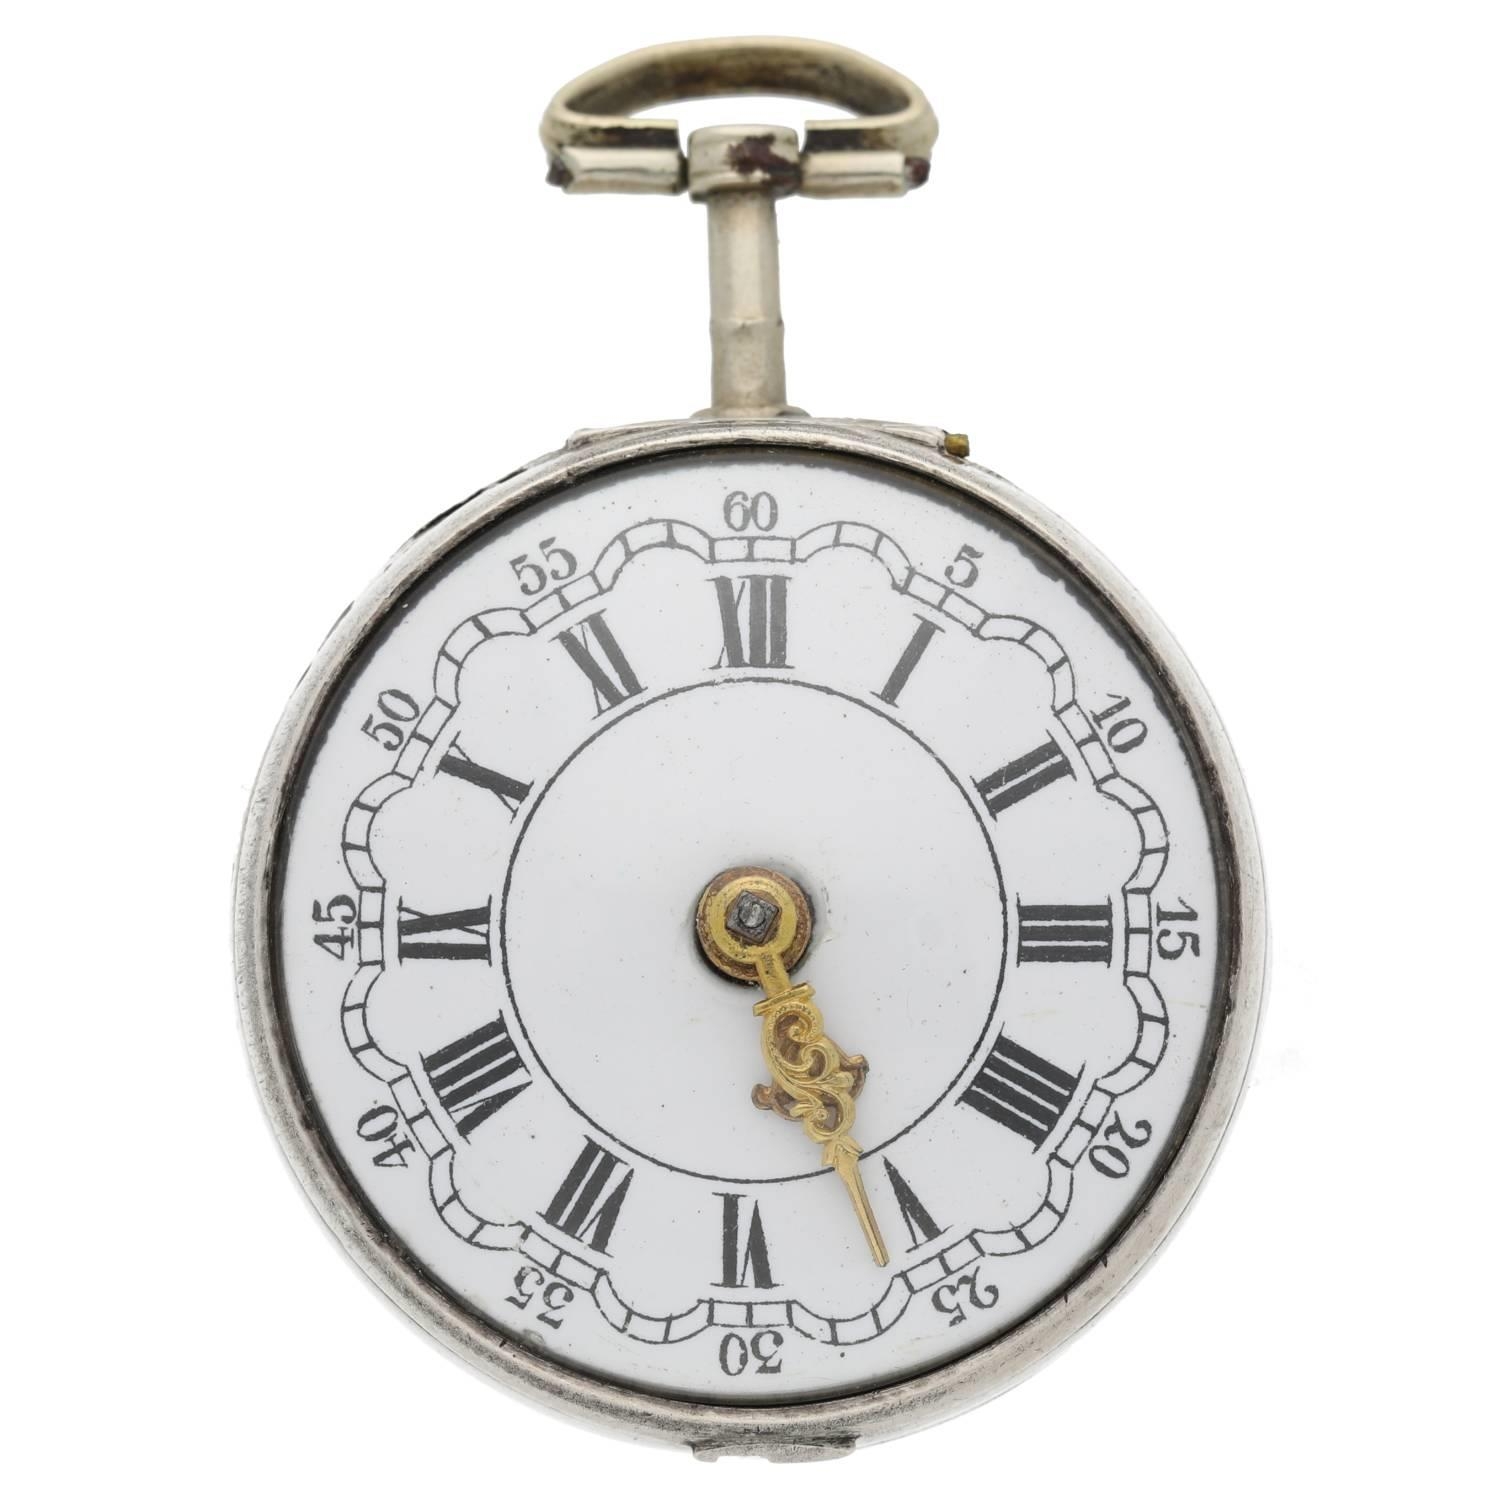 Samson, London - George III English silver repoussé pair cased verge pocket watch, London 1785, - Image 3 of 10